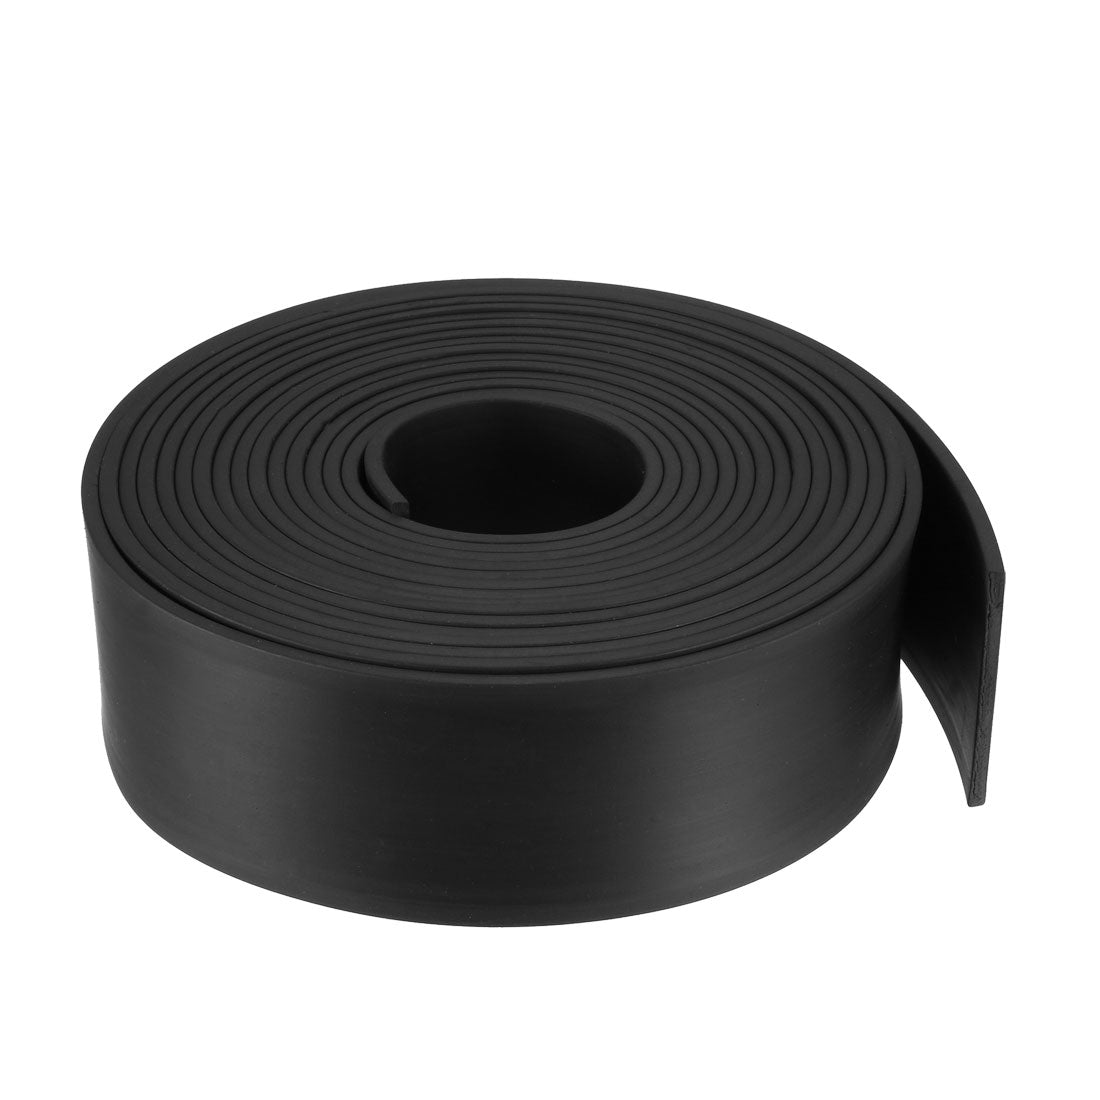 uxcell Uxcell Solid Rectangle Rubber Seal Strip 50mm Wide 3mm Thick, 5 Meters Long Black